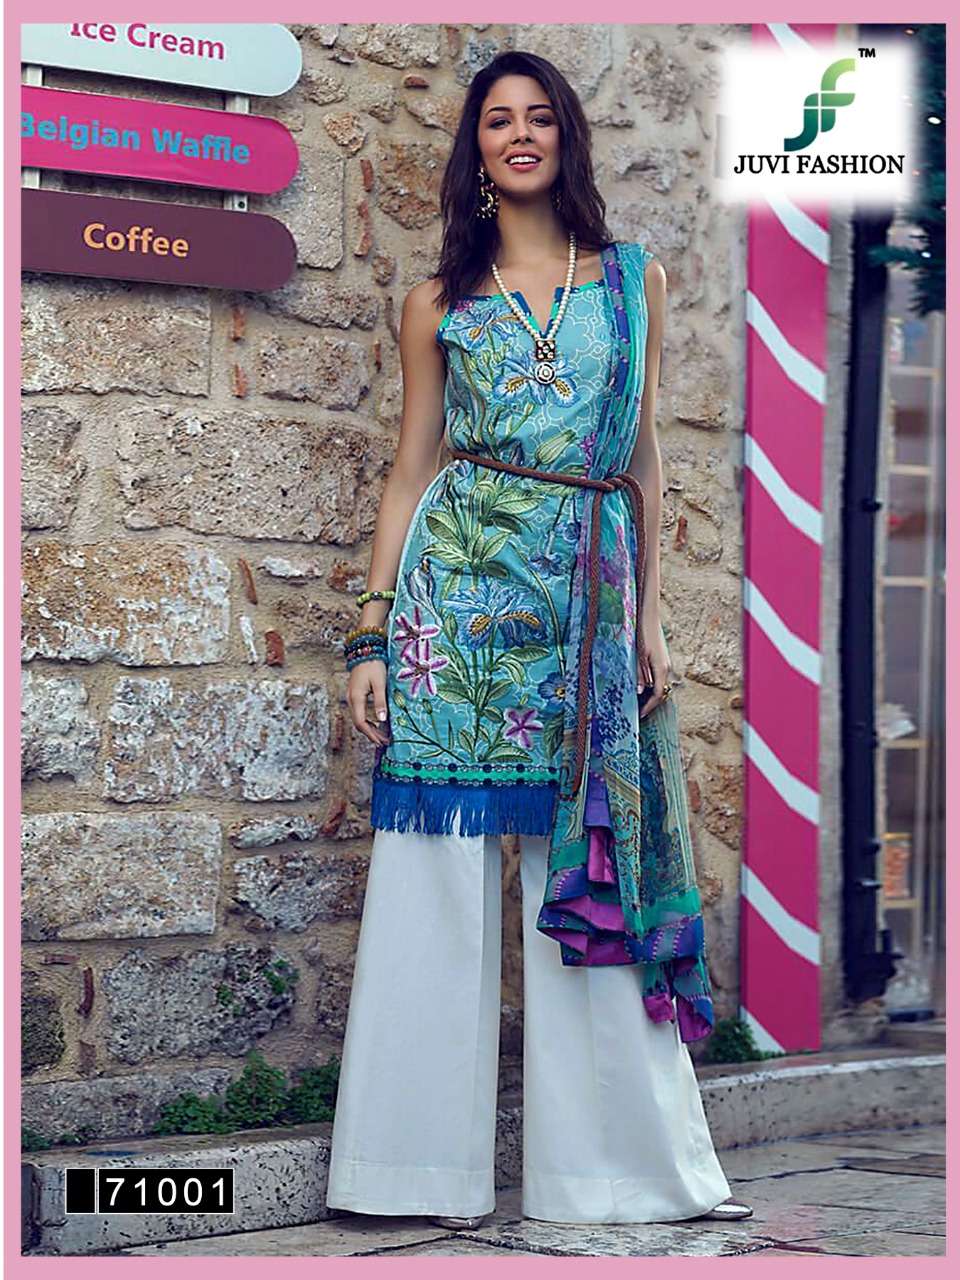 SARANG VOL-2 BY JUVI FASHION 71001 TO 71005 SERIES DESIGNER PAKISTANI SUITS BEAUTIFUL FANCY STYLISH COLORFUL PARTY WEAR & OCCASIONAL WEAR PURE COTTON LAWN PRINTED DRESSES AT WHOLESALE PRICE